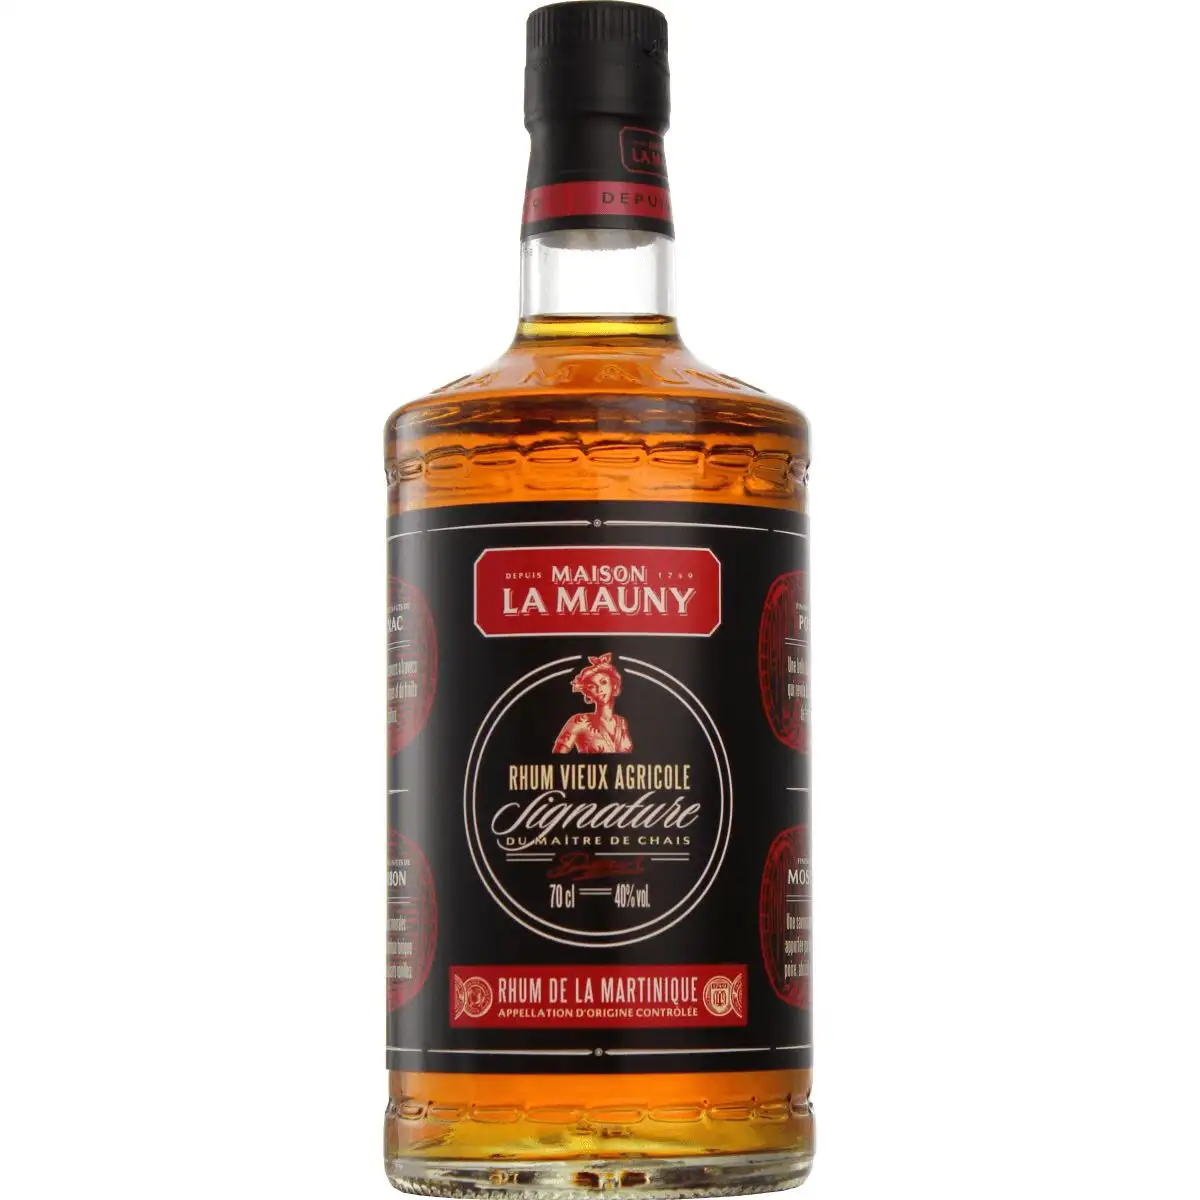 Image of the front of the bottle of the rum Signature